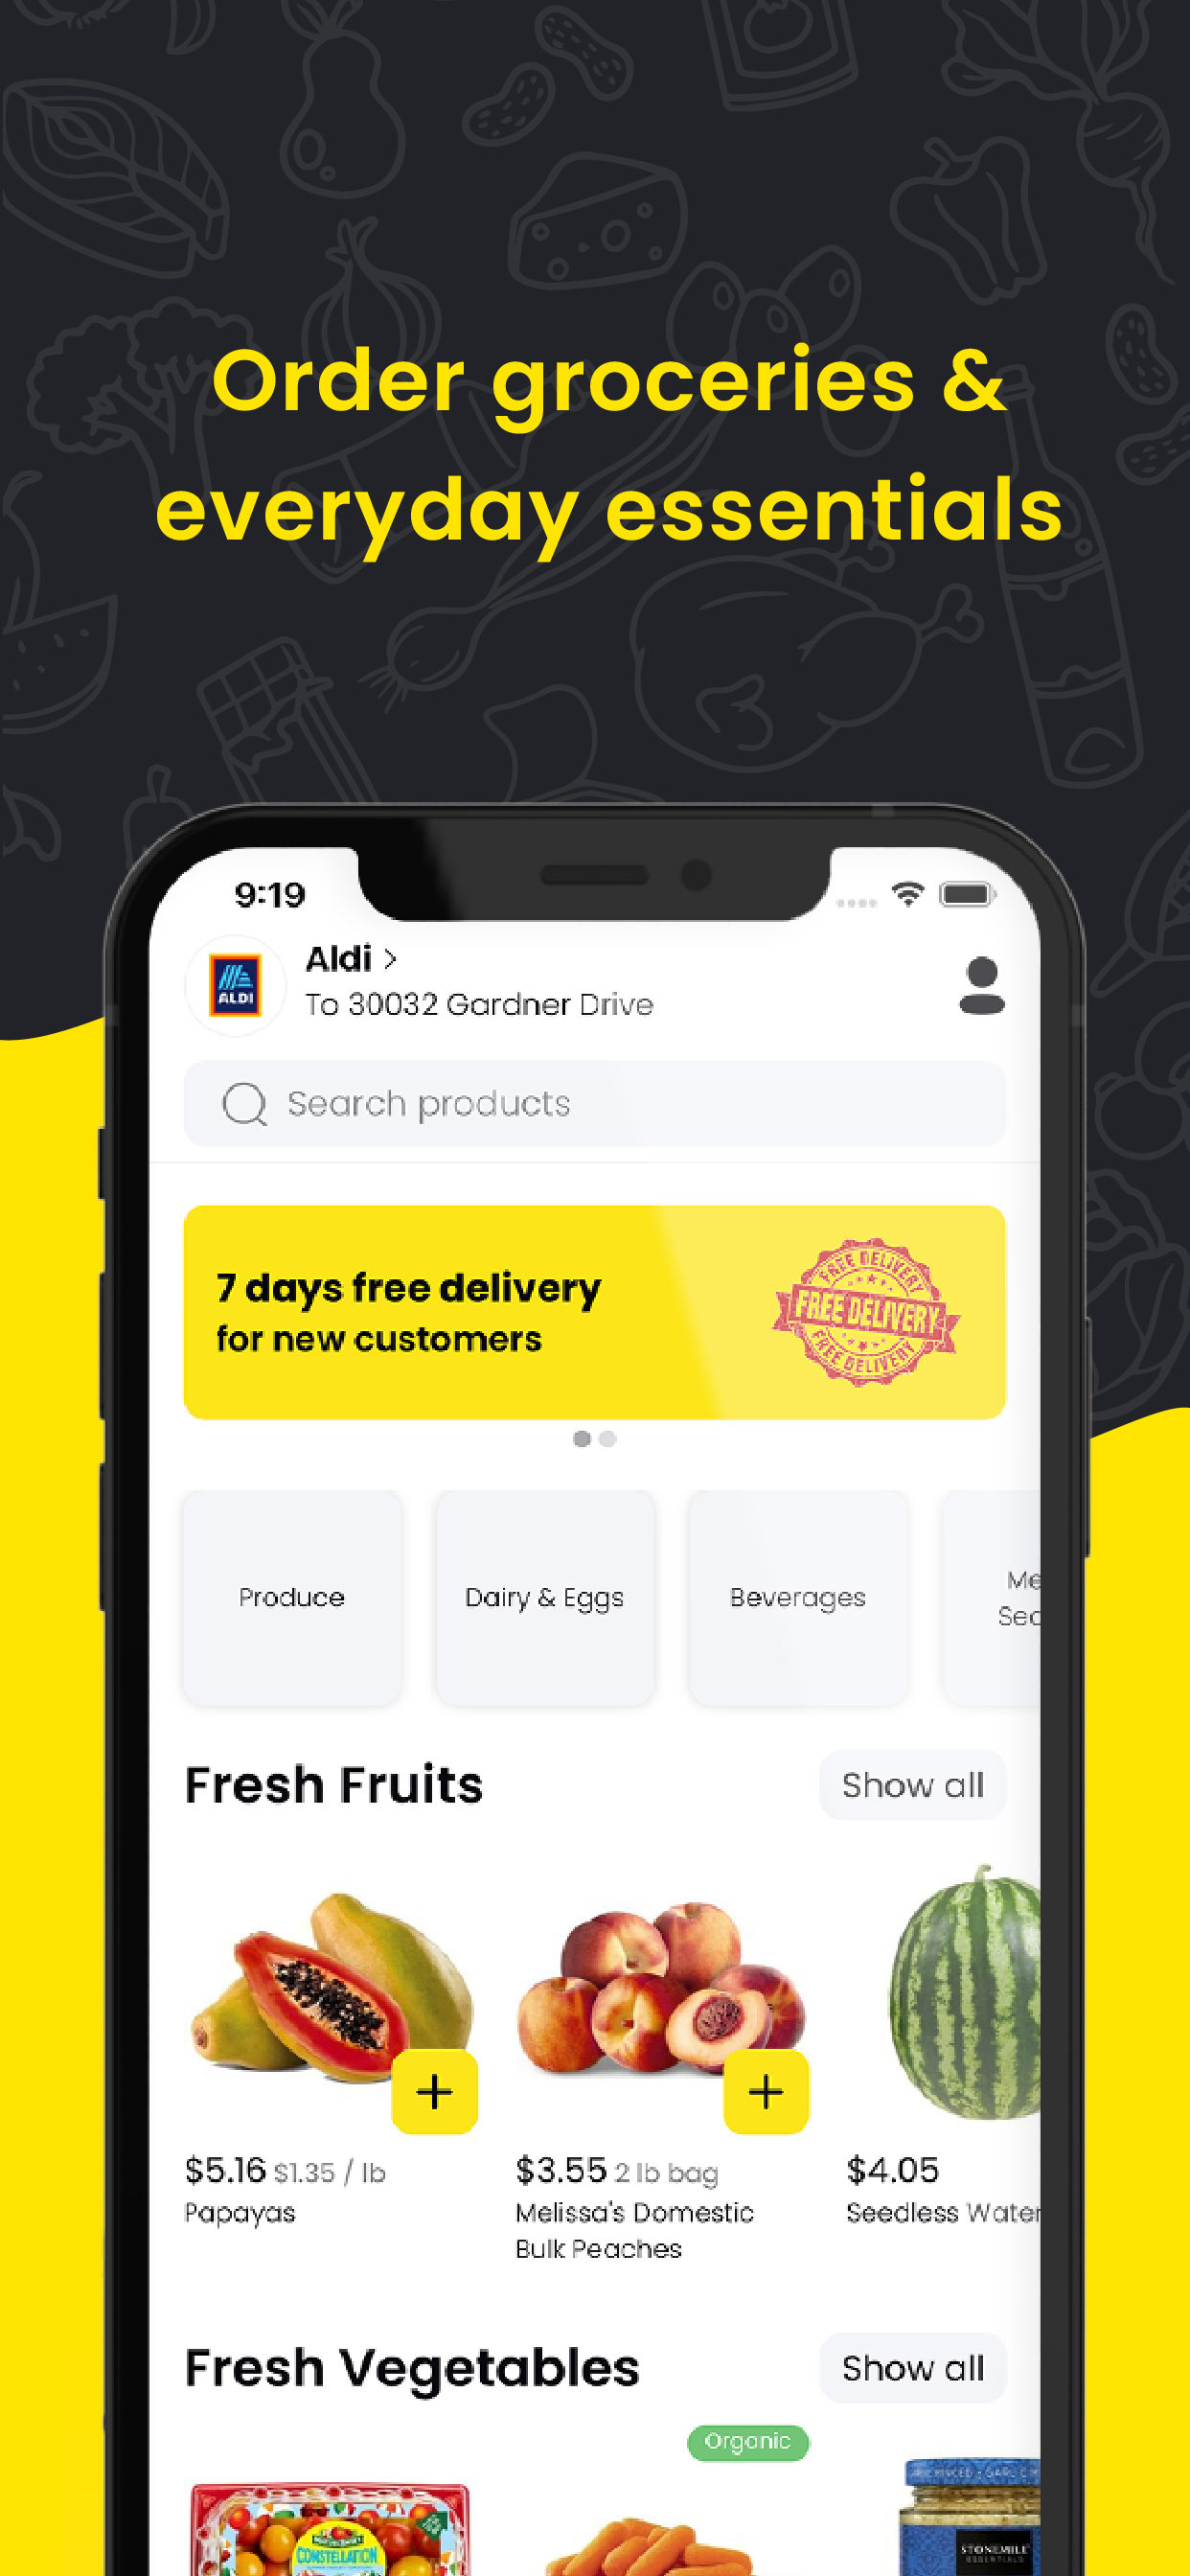 Order groceries and everyday essentials